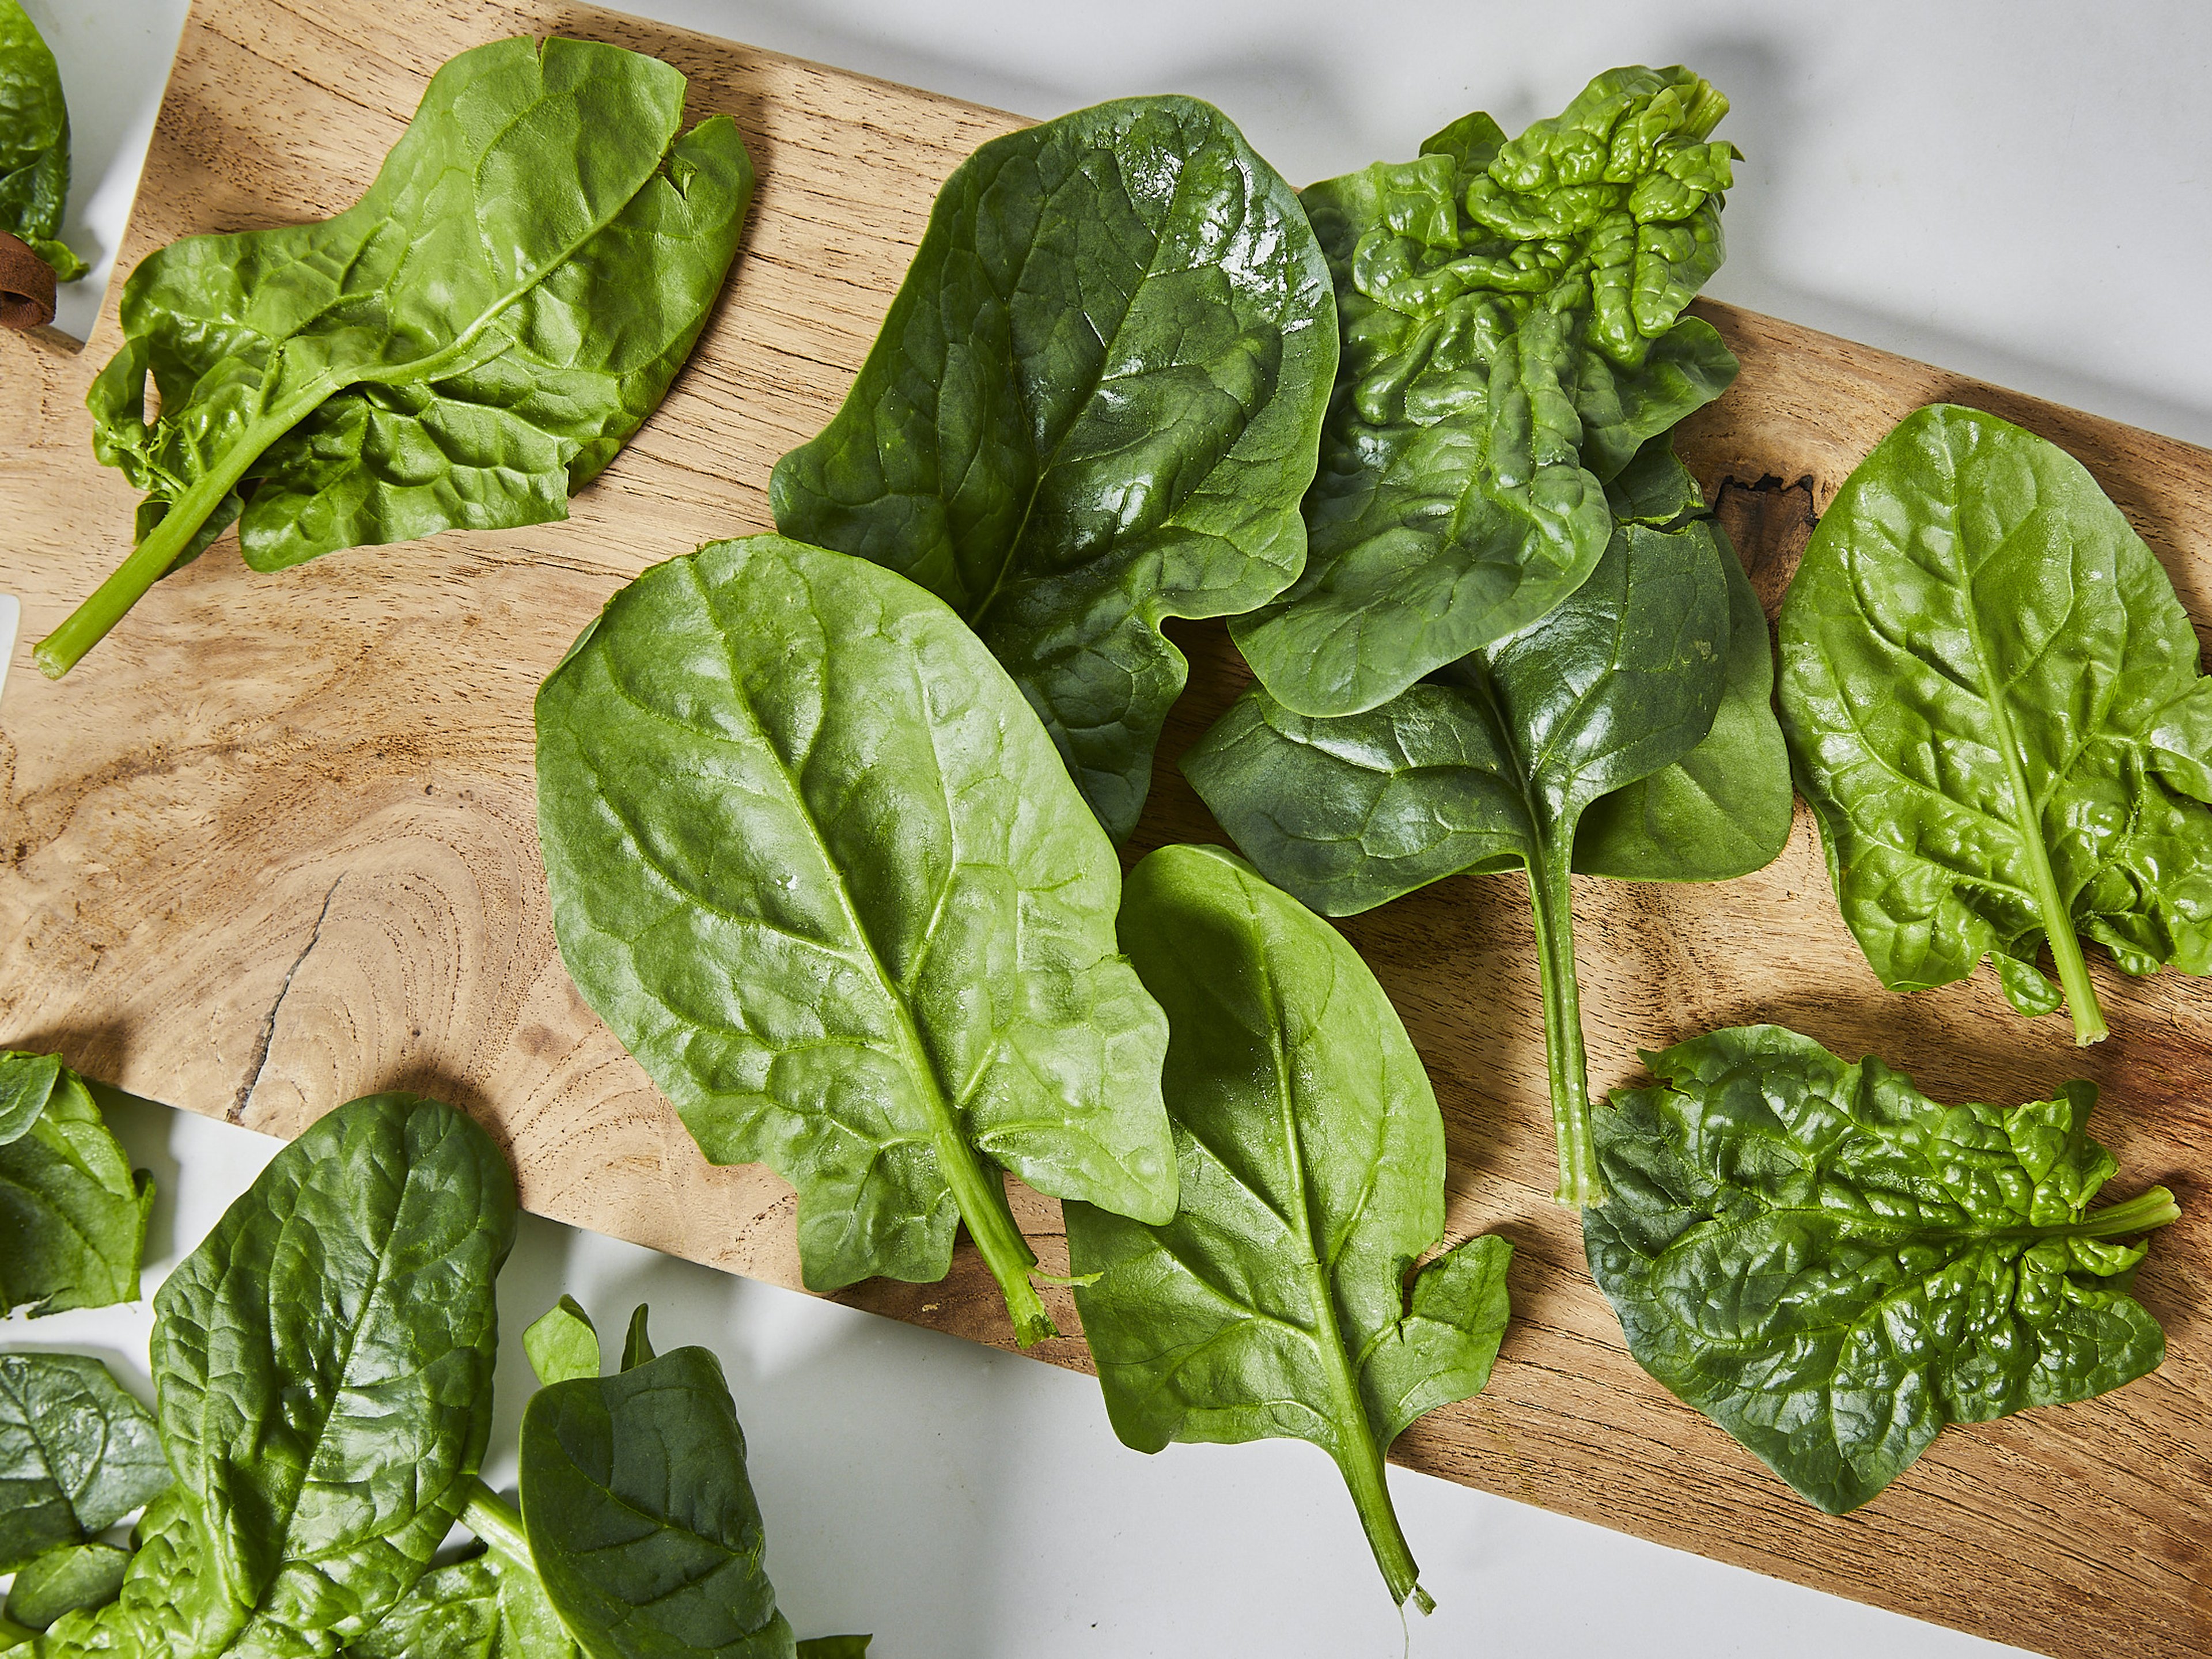 Why Spinach is My Go-To Superfood + 10 Delicious Spinach Recipes